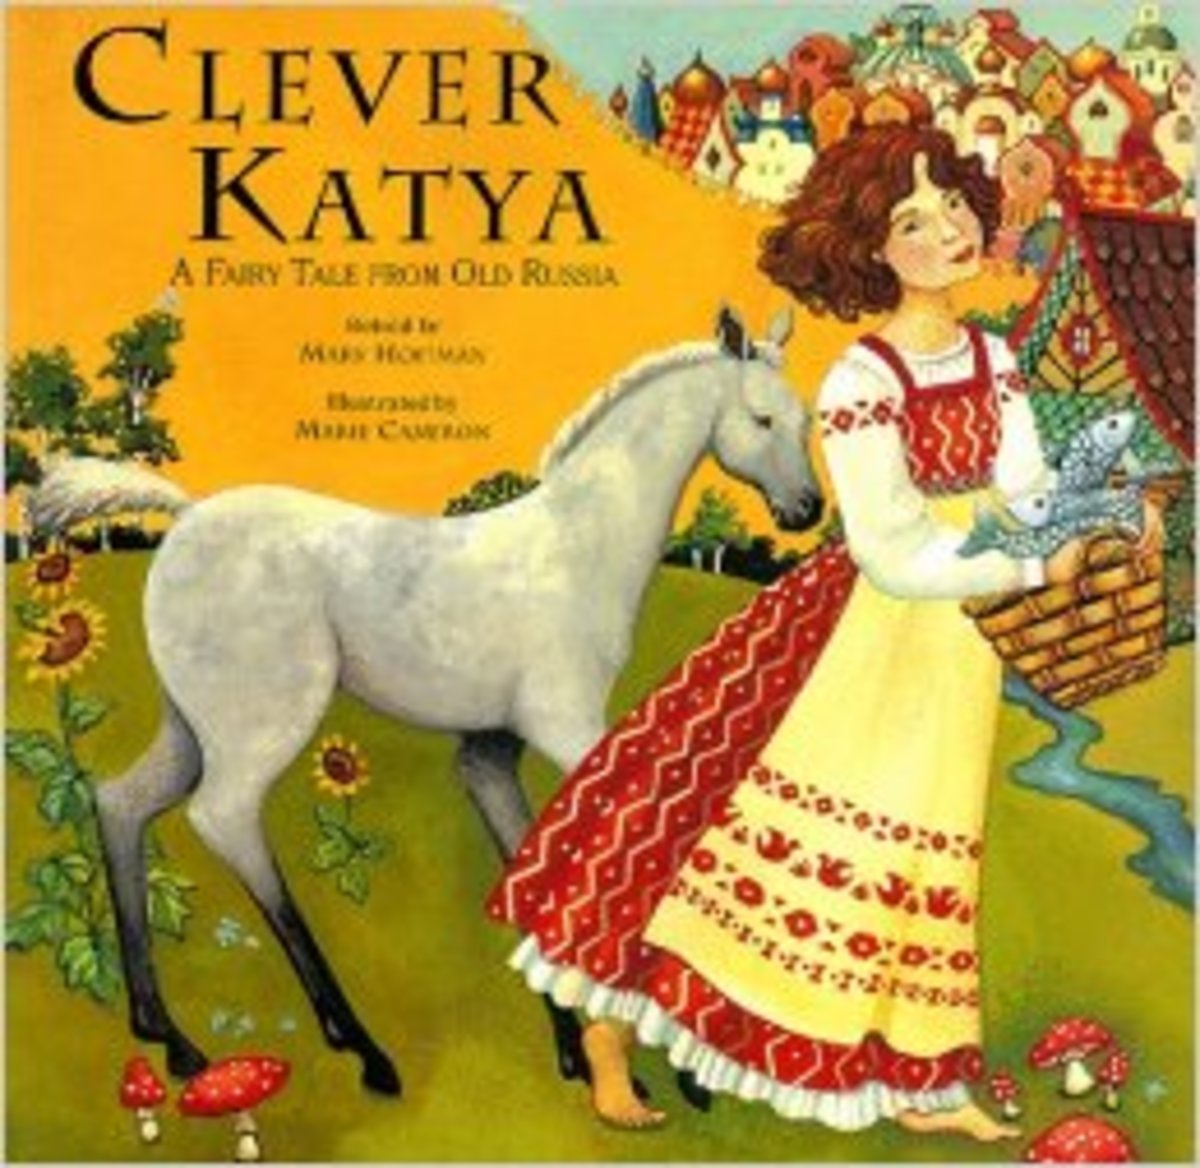 Clever Katya: A Fairy Tale from Old Russia by Mary Hoffman - All images are from amazon.com.